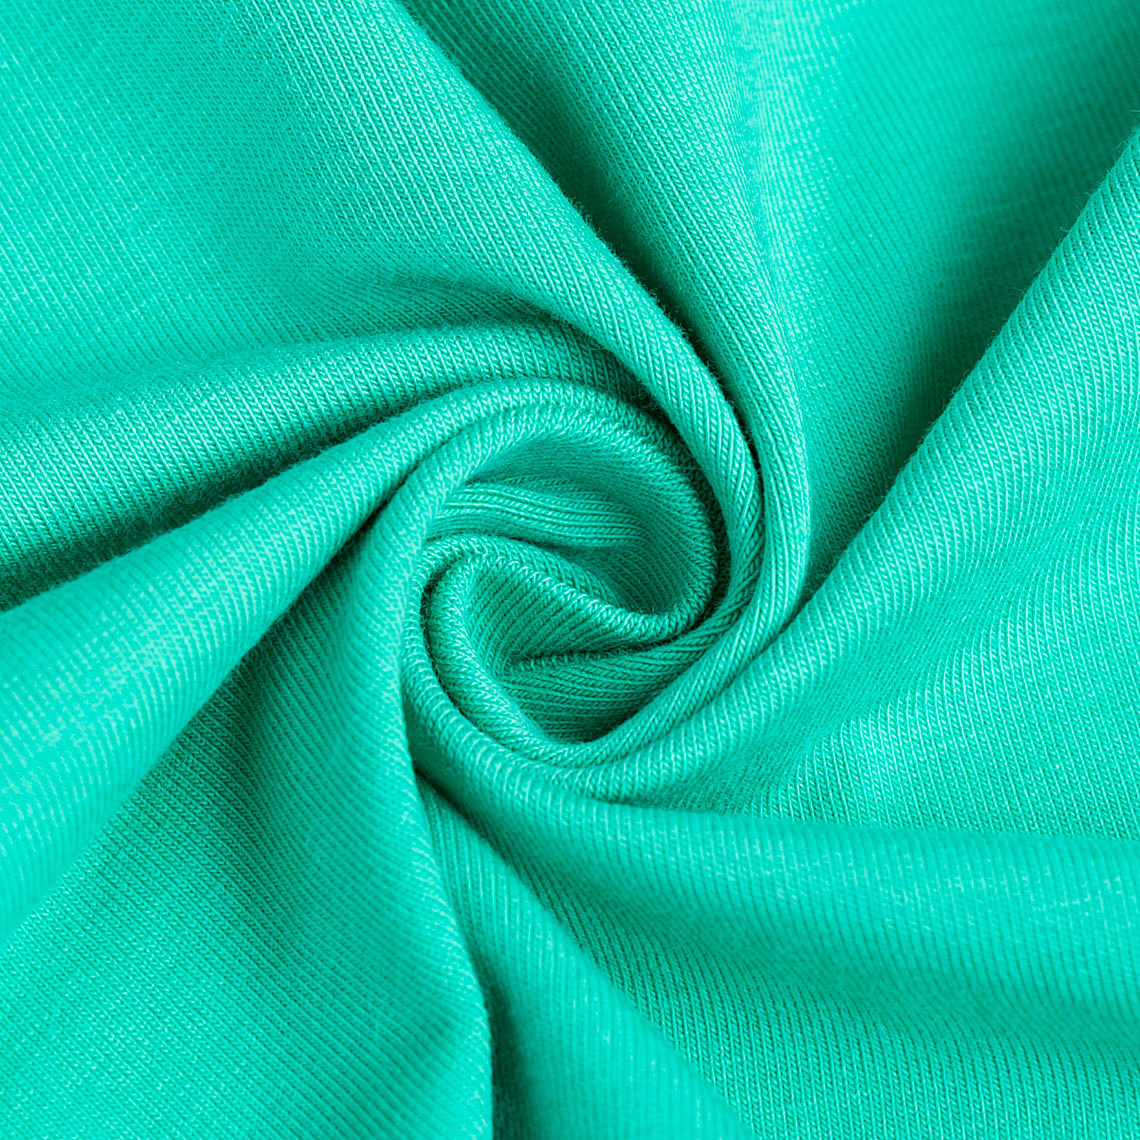 Cotton / Spandex Blended Fabric Buyers - Wholesale Manufacturers